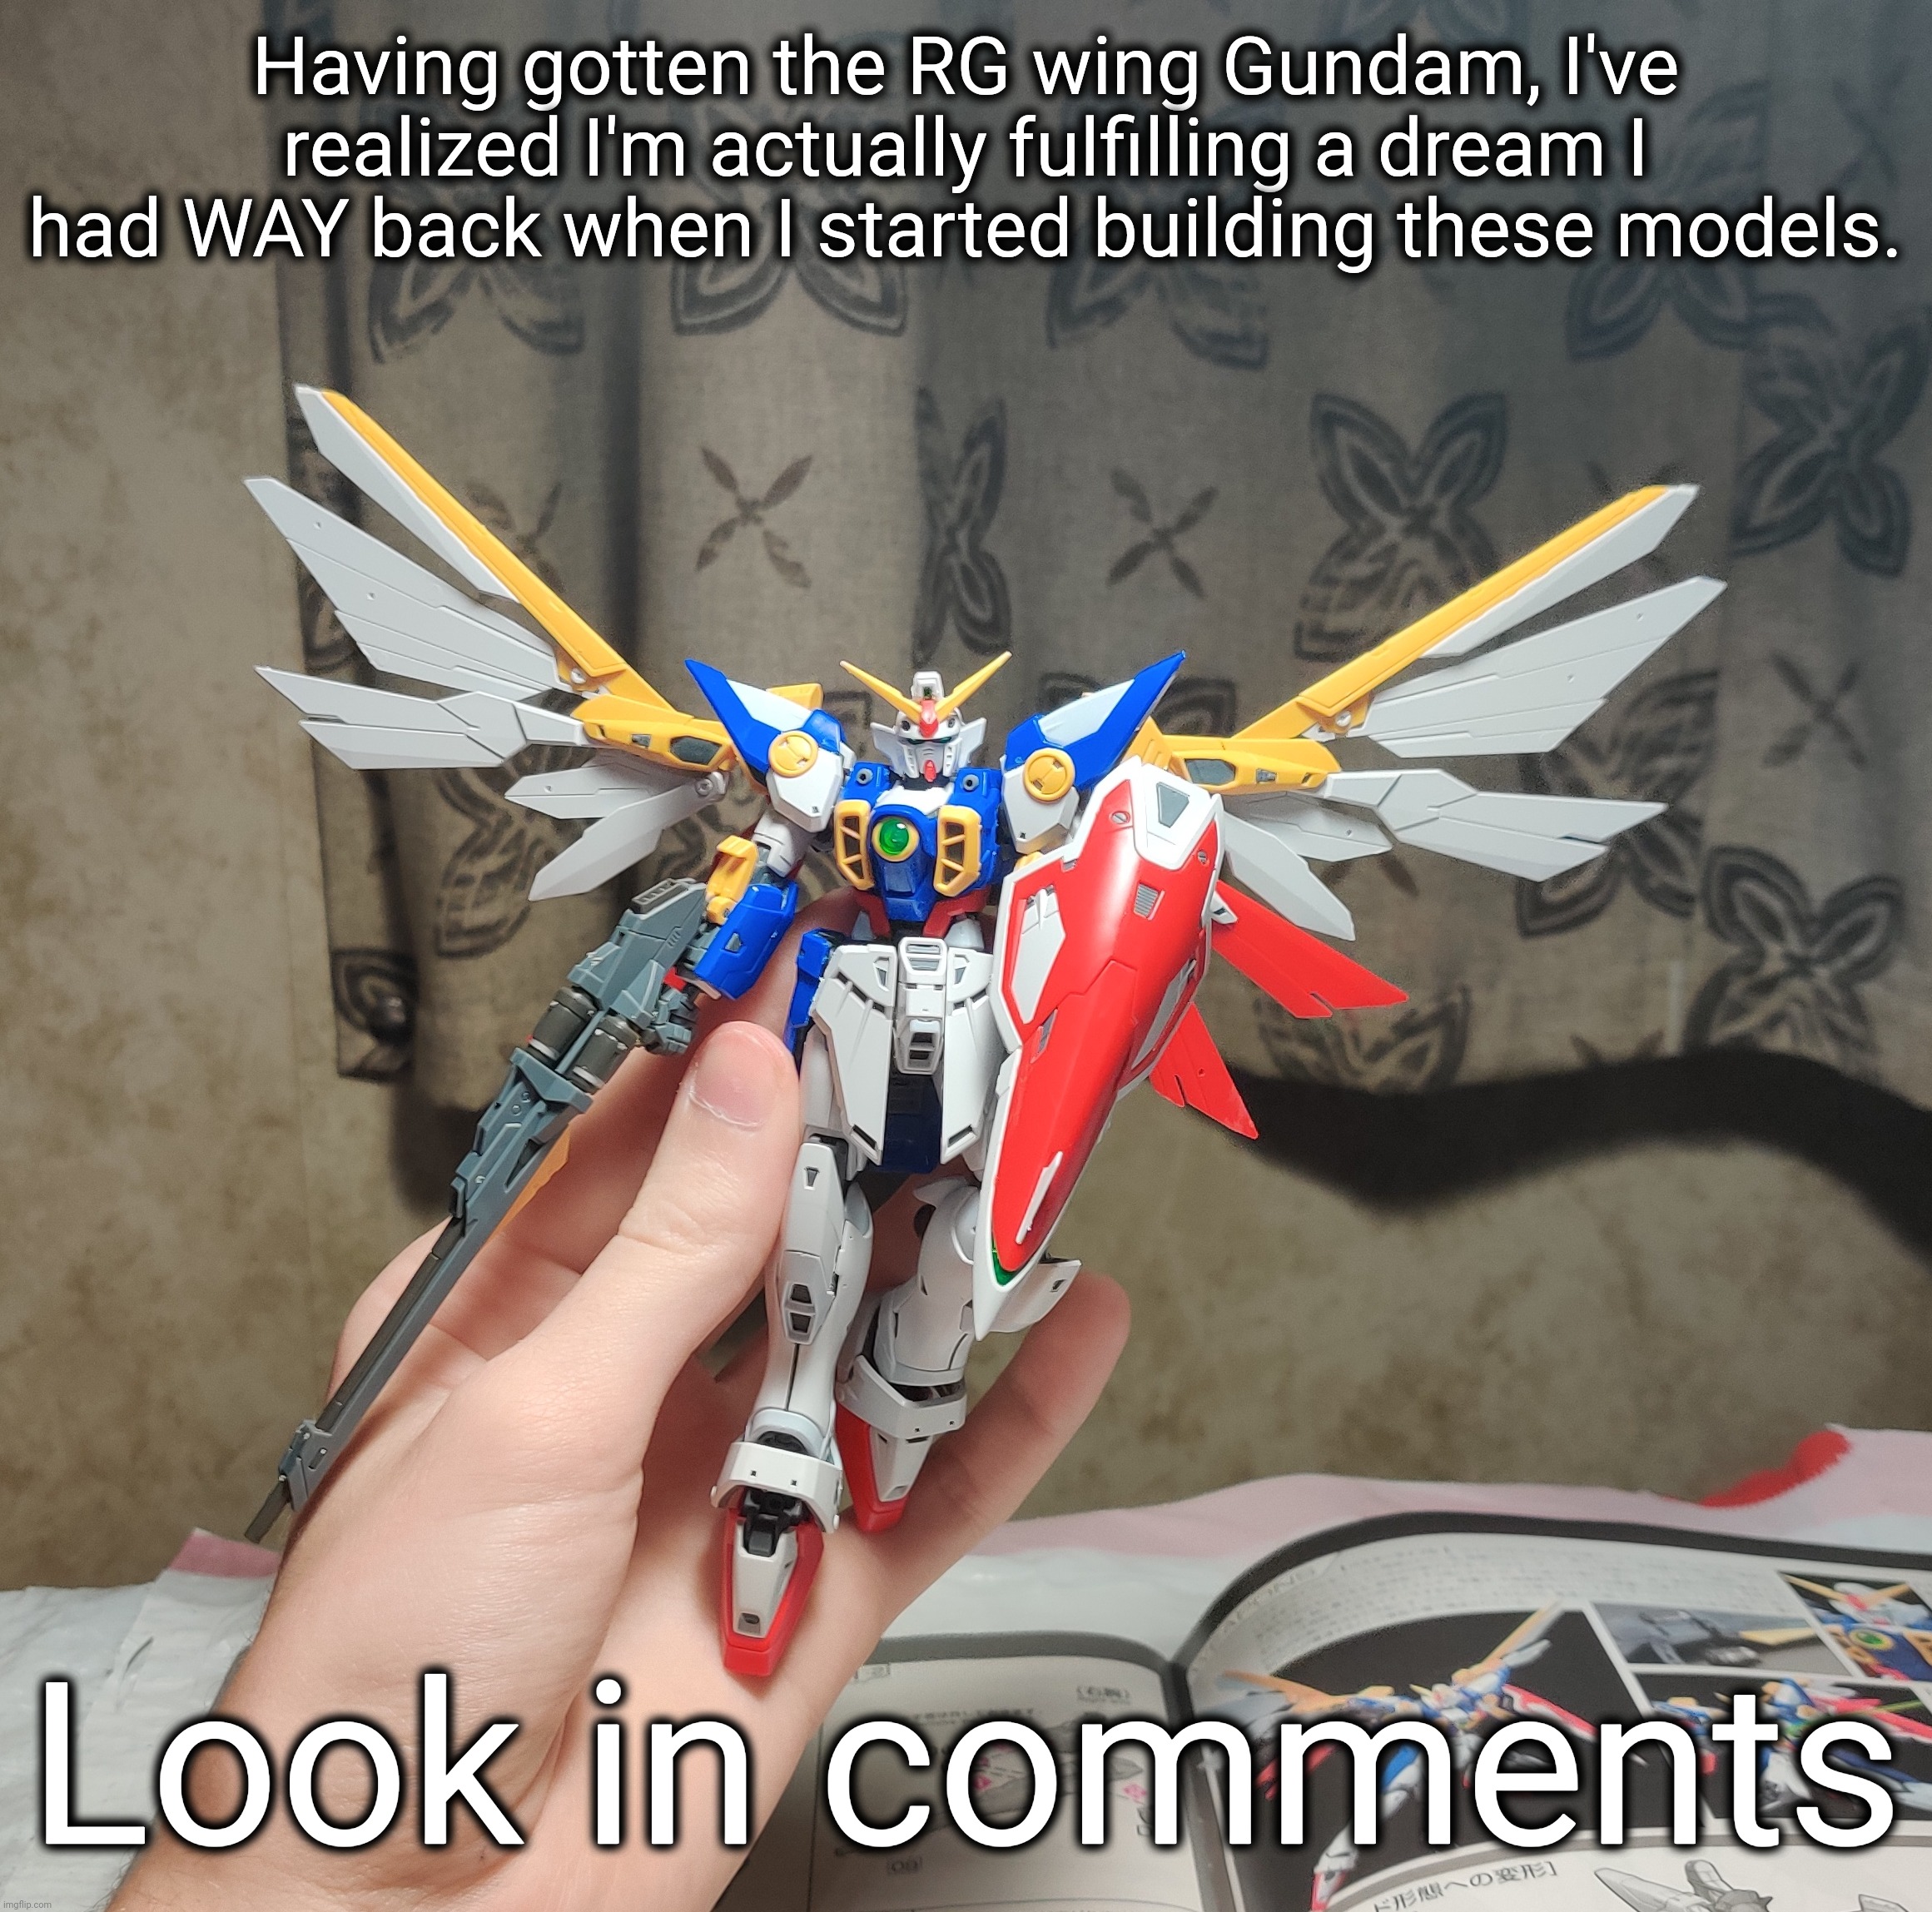 It got a bit longer than I thought. | Having gotten the RG wing Gundam, I've realized I'm actually fulfilling a dream I had WAY back when I started building these models. Look in comments | made w/ Imgflip meme maker